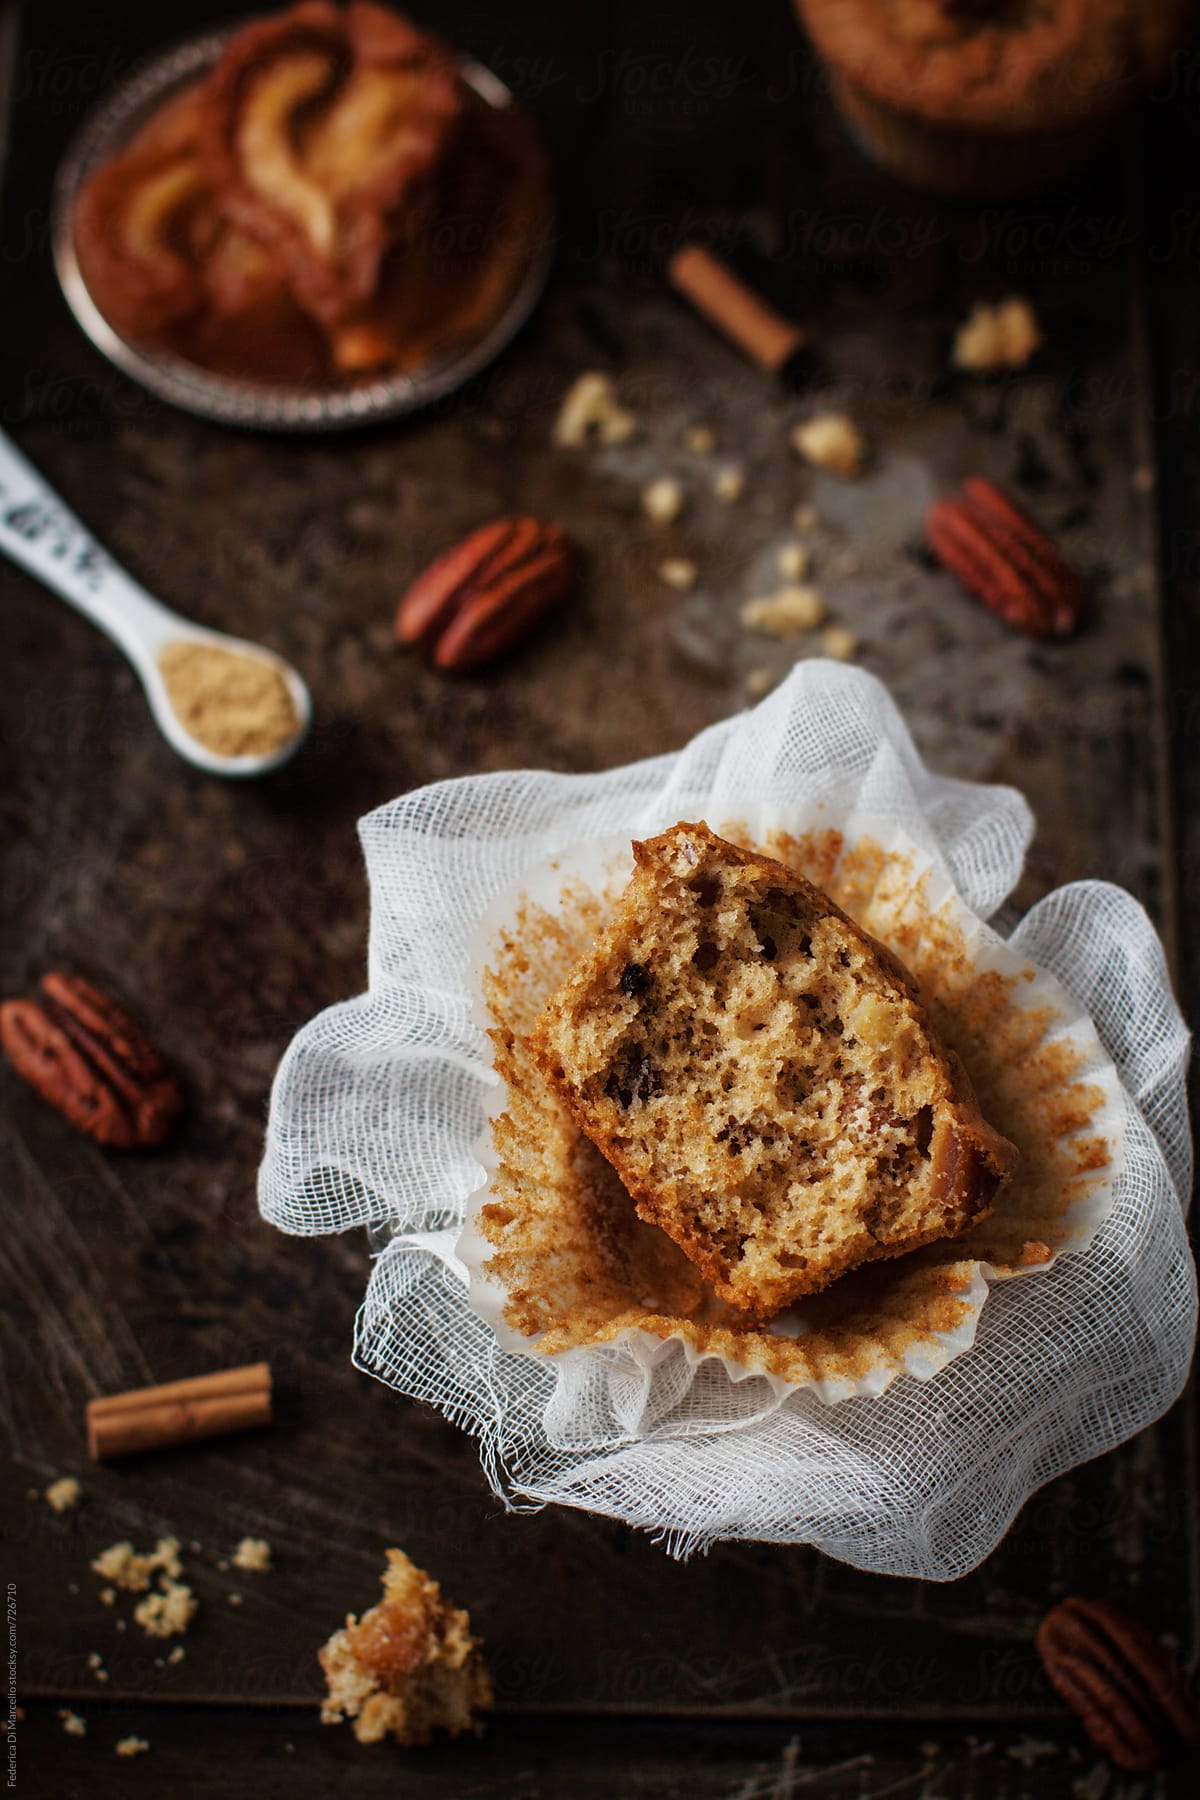 Spiced muffins with pears and pecans